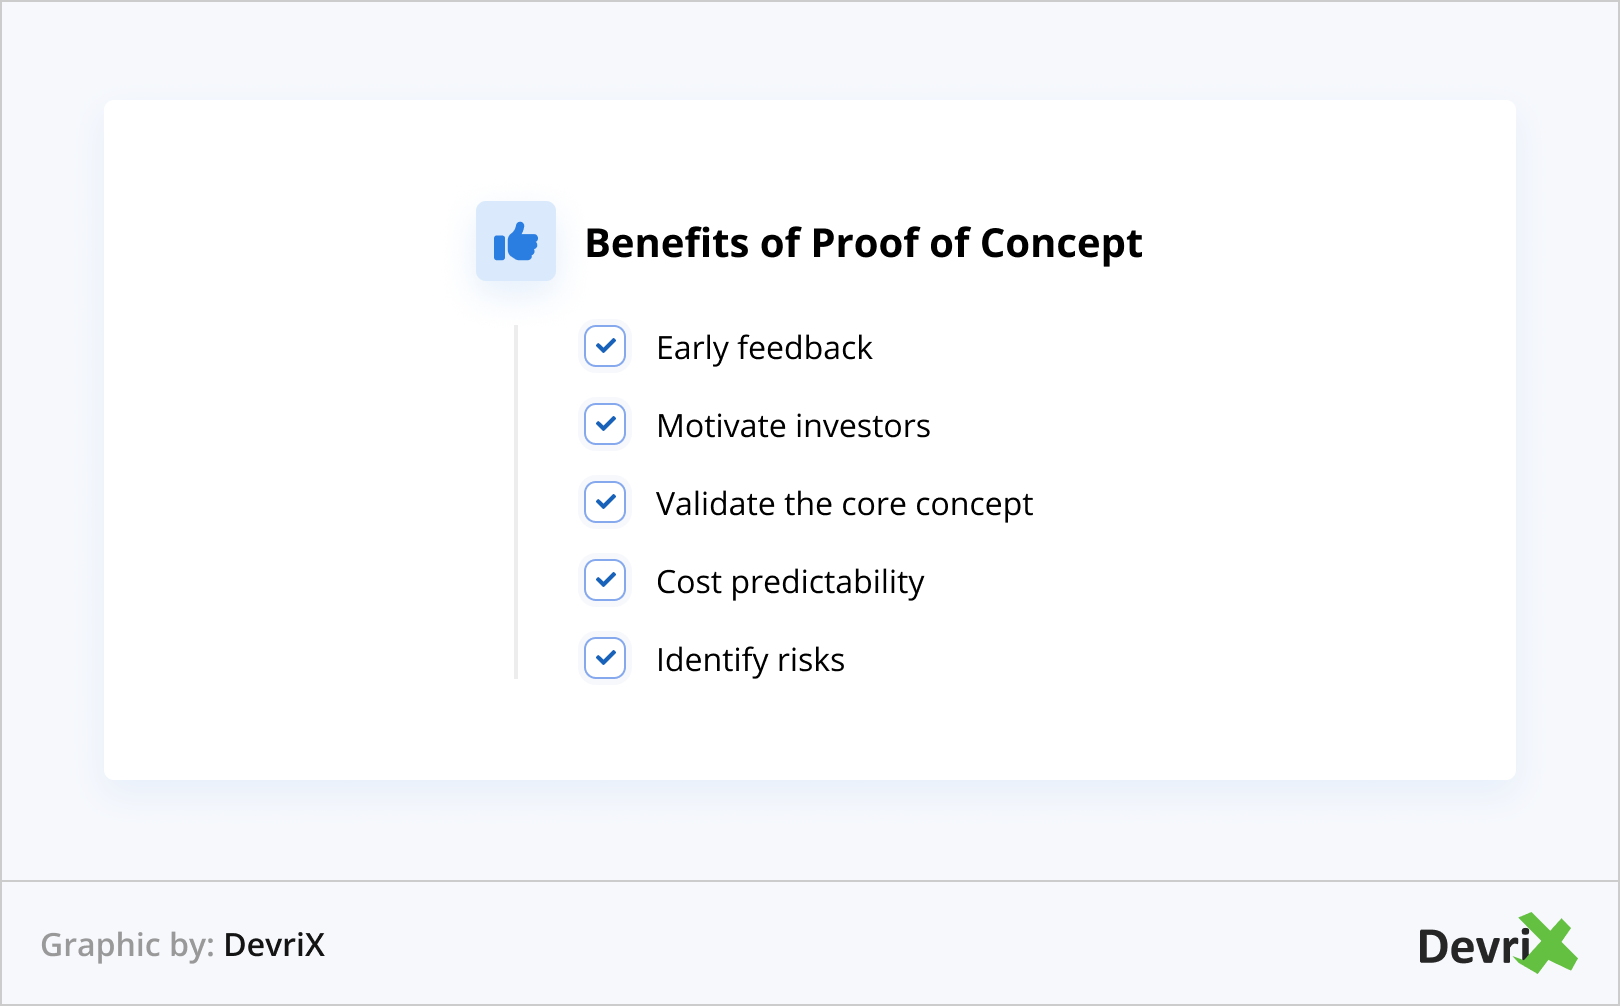 Benefits of Proof of Concept